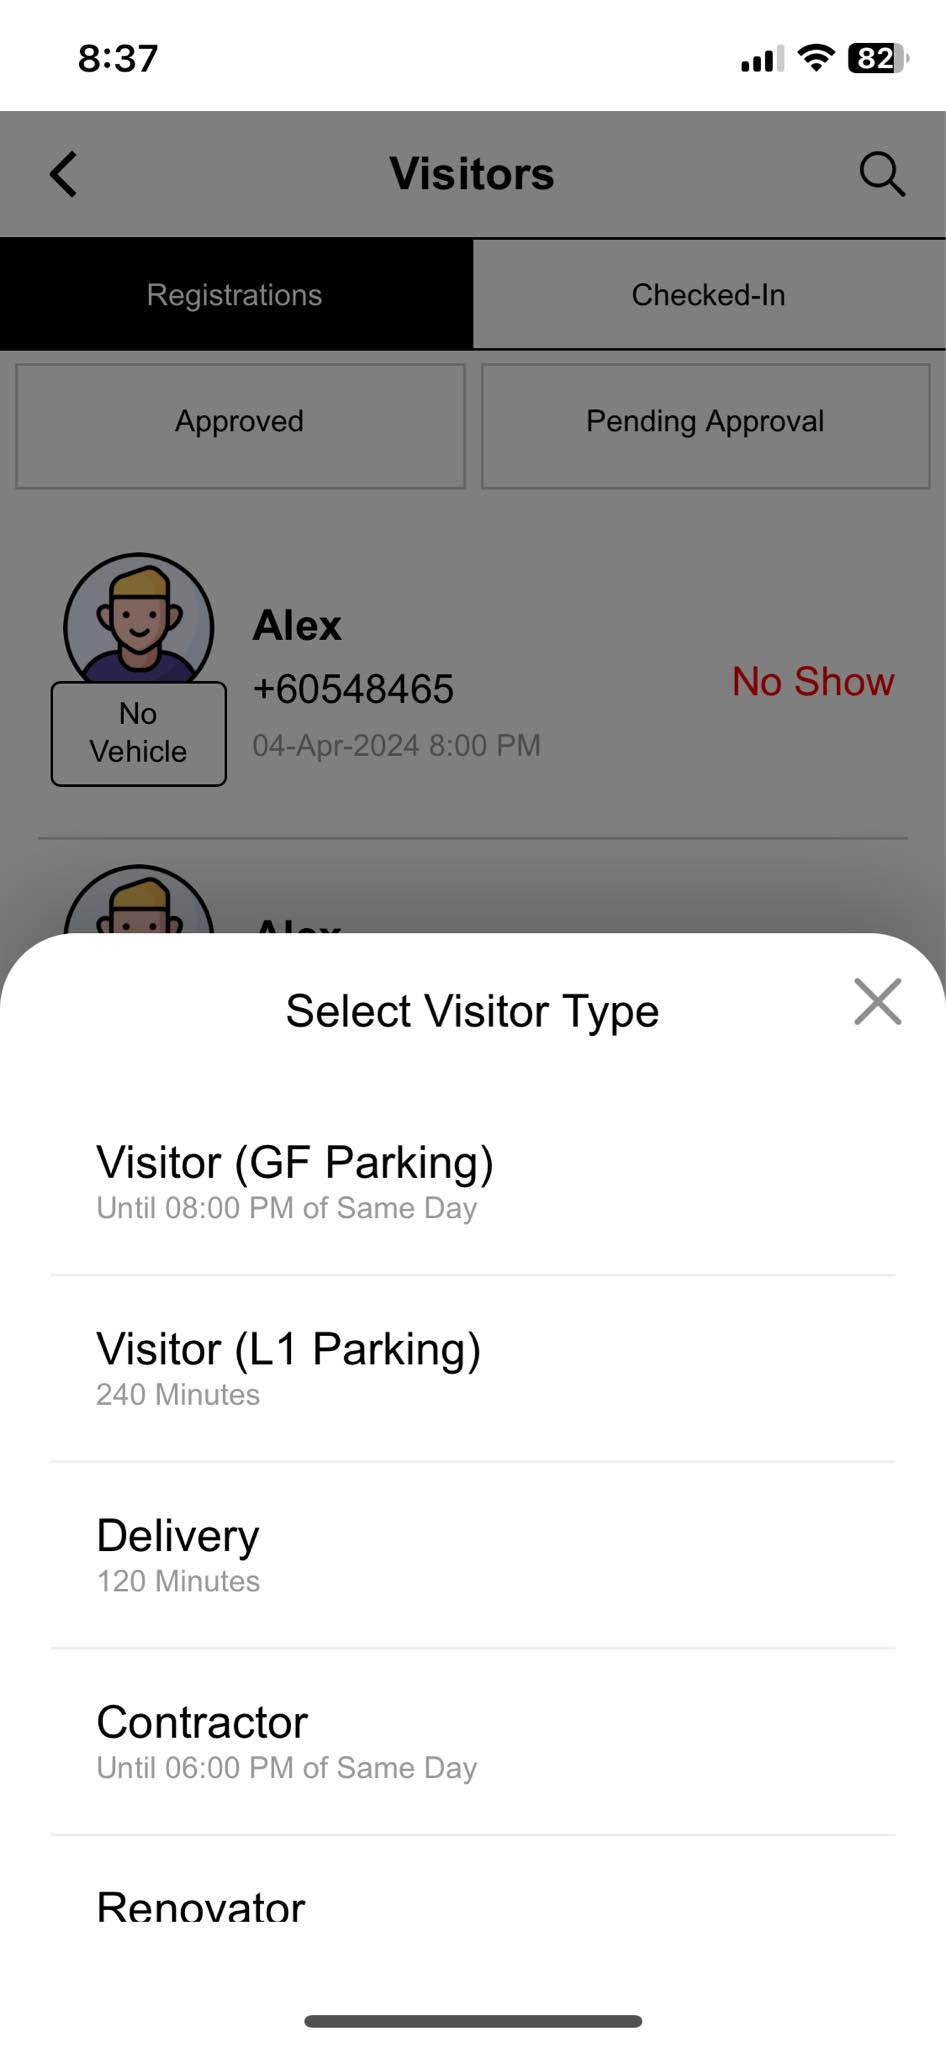 Visitors App - Select Visitor Type